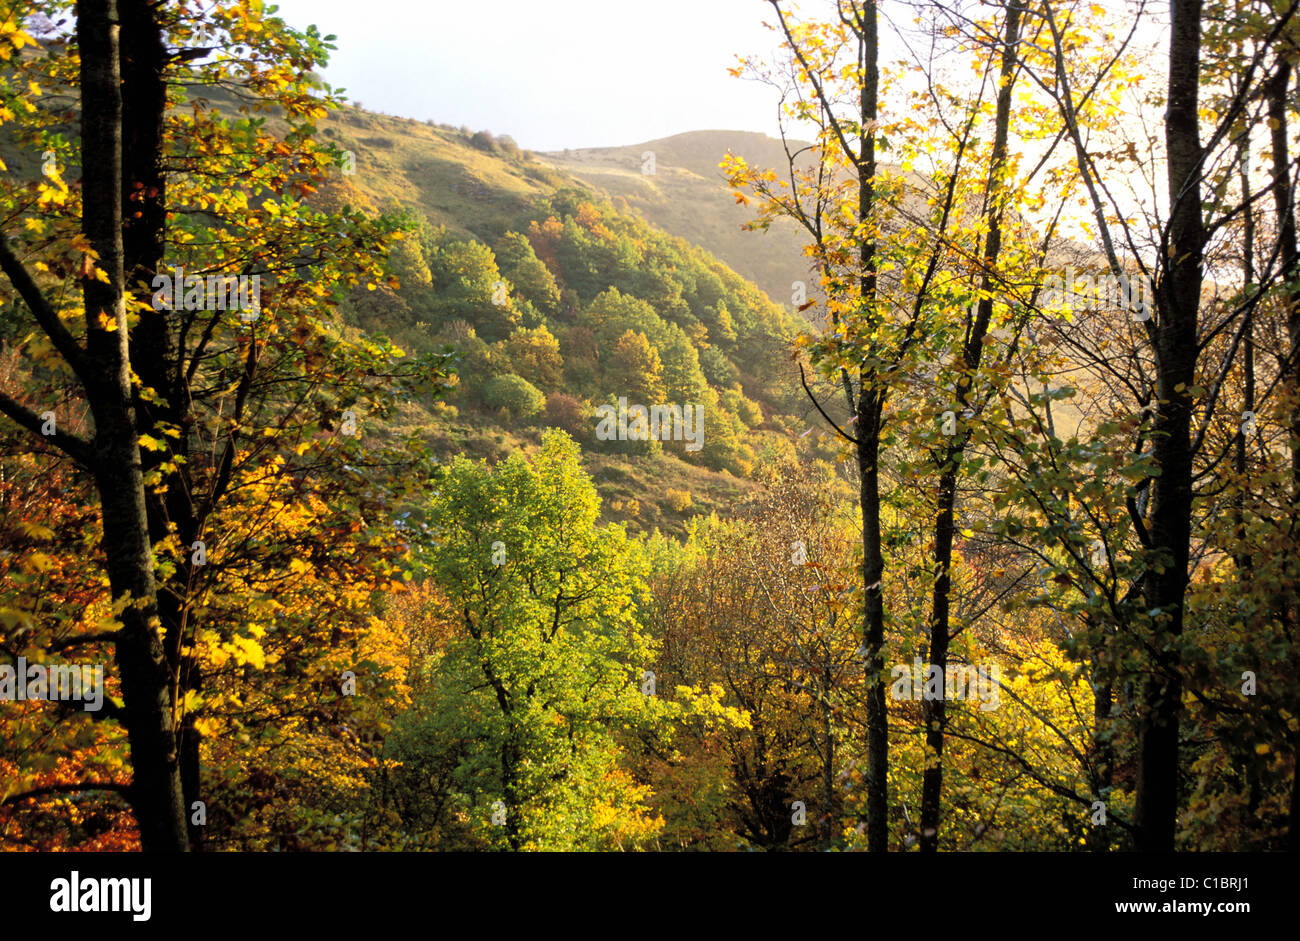 France, Puy de Dome, the plateau of Cezallier the autumn in Mazoires Stock Photo